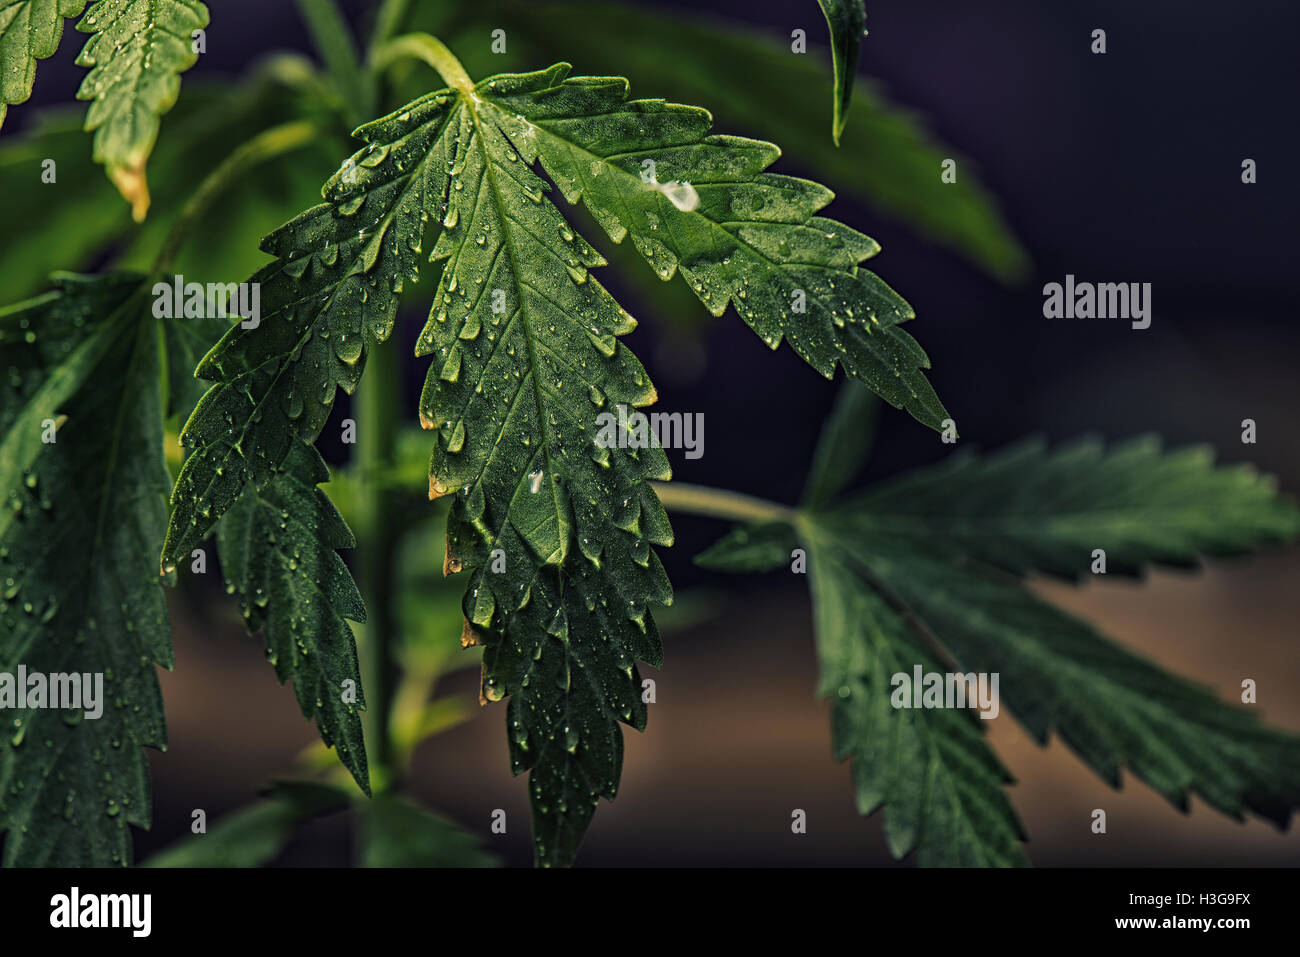 Detail of Marijuana (cannabis sativa) plant leaves with water drops Stock Photo